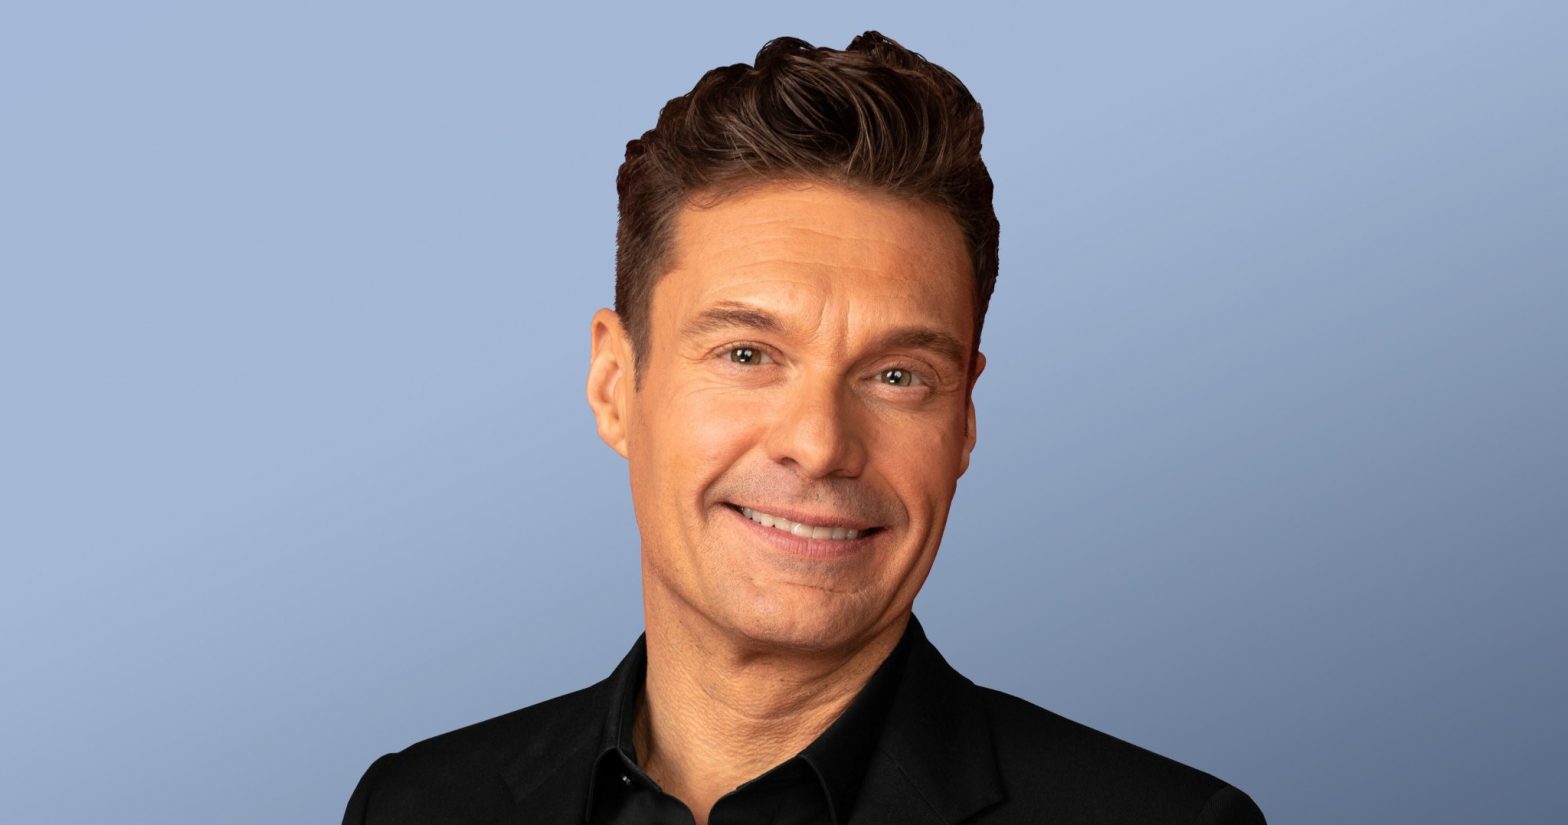 Ryan Seacrest top controversies: From sexual assault allegations to Workplace Misconduct